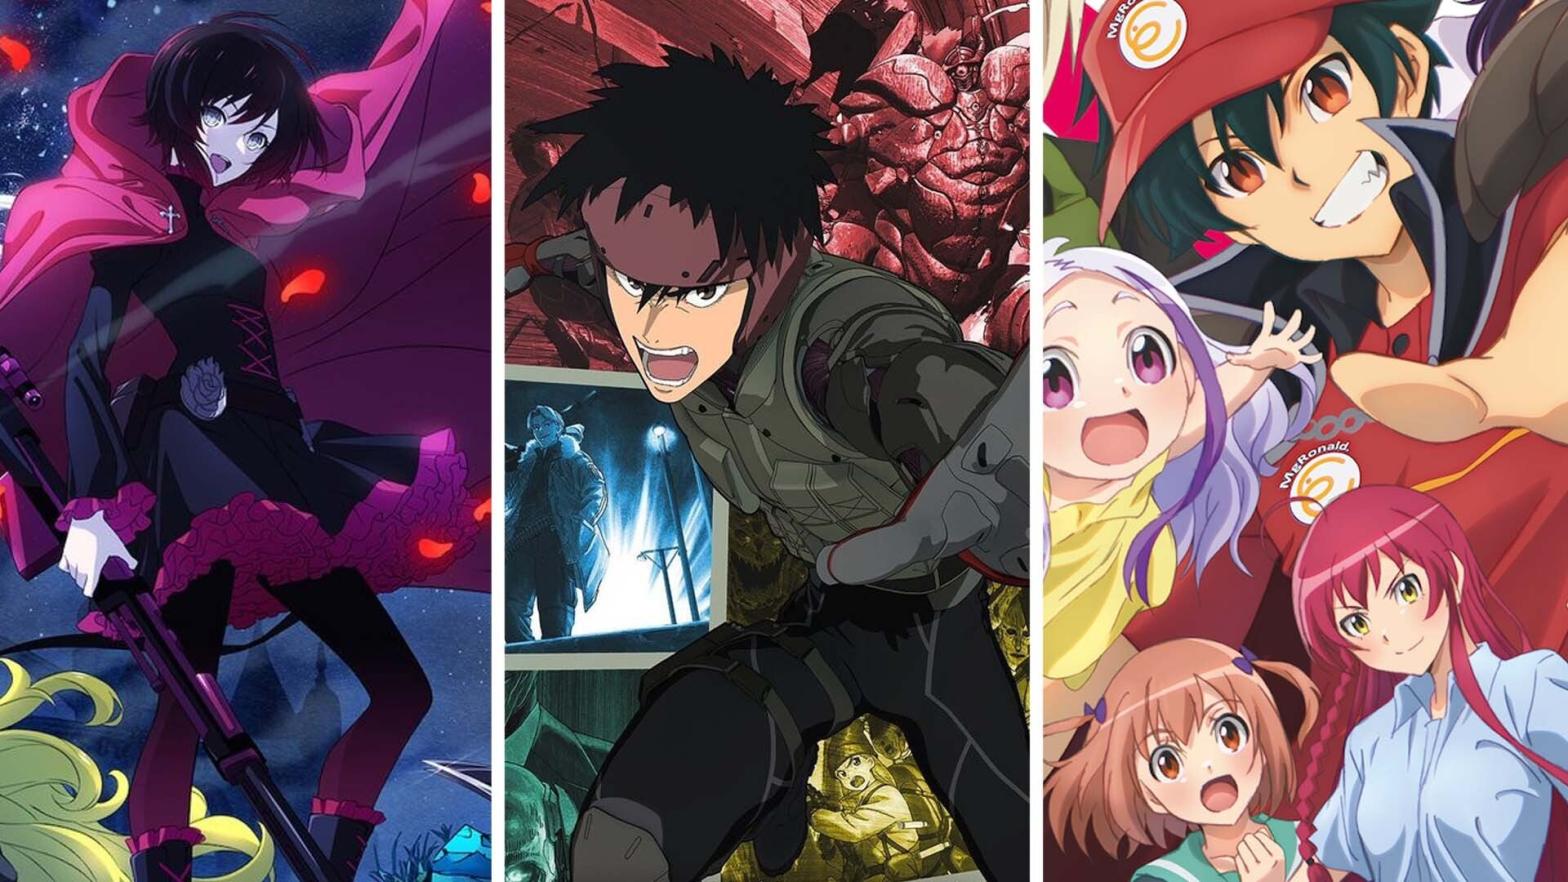 Cool off (or heat up) with these summer anime. (Image: SHAFT / David Production / 3Hz / Kotaku)